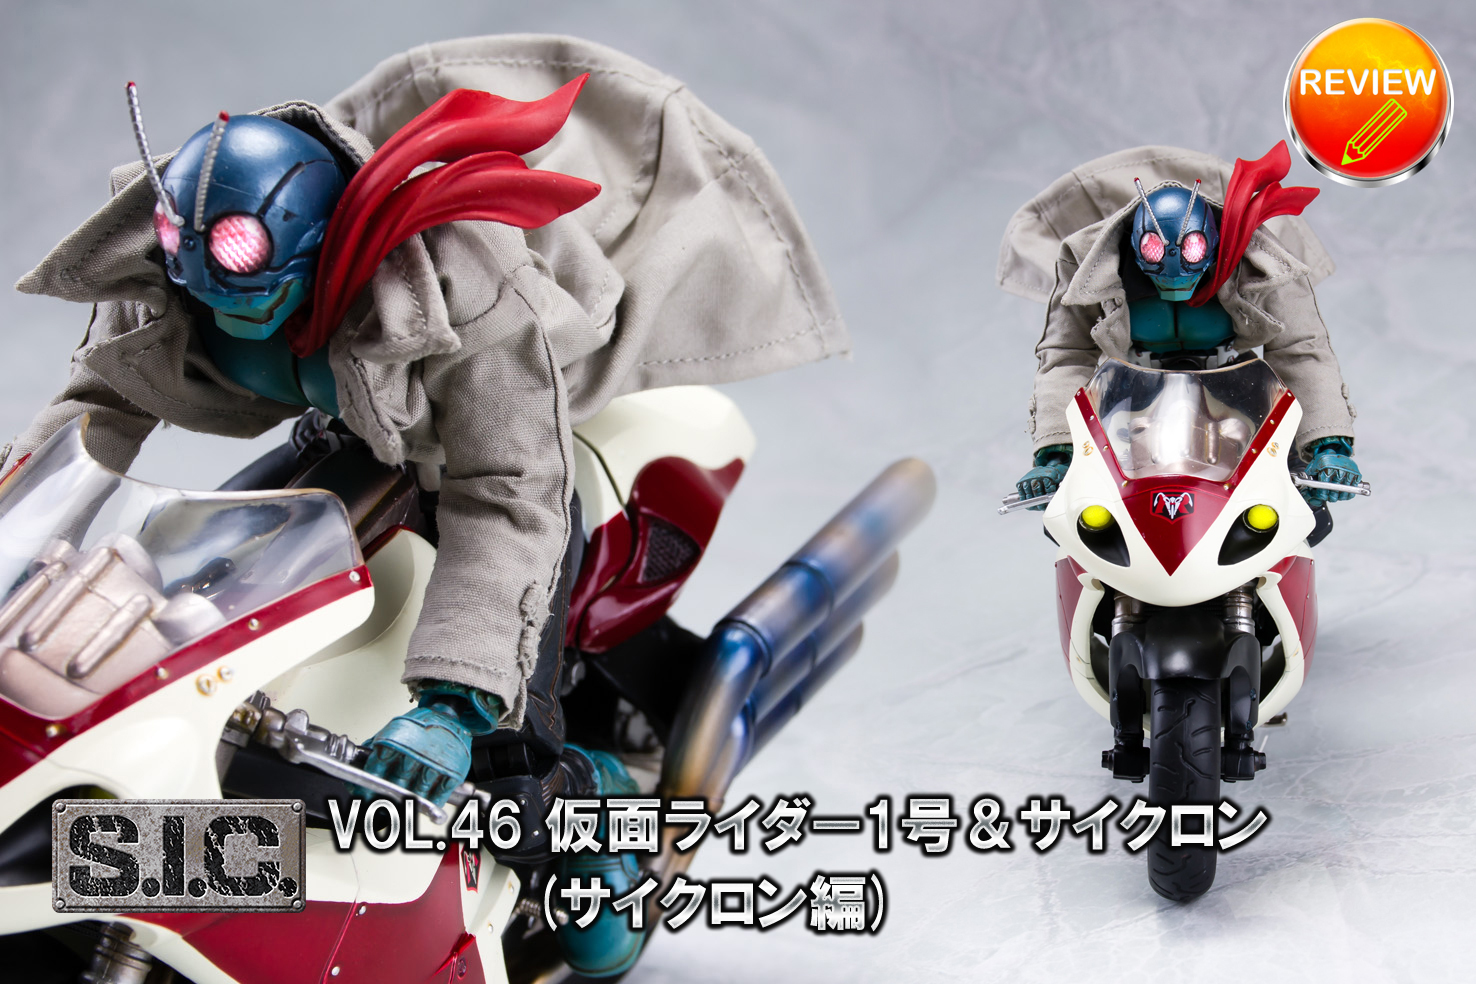 S.I.C. VOL.46 仮面ライダー1号＆サイクロン(仮面ライダー THE FIRST)